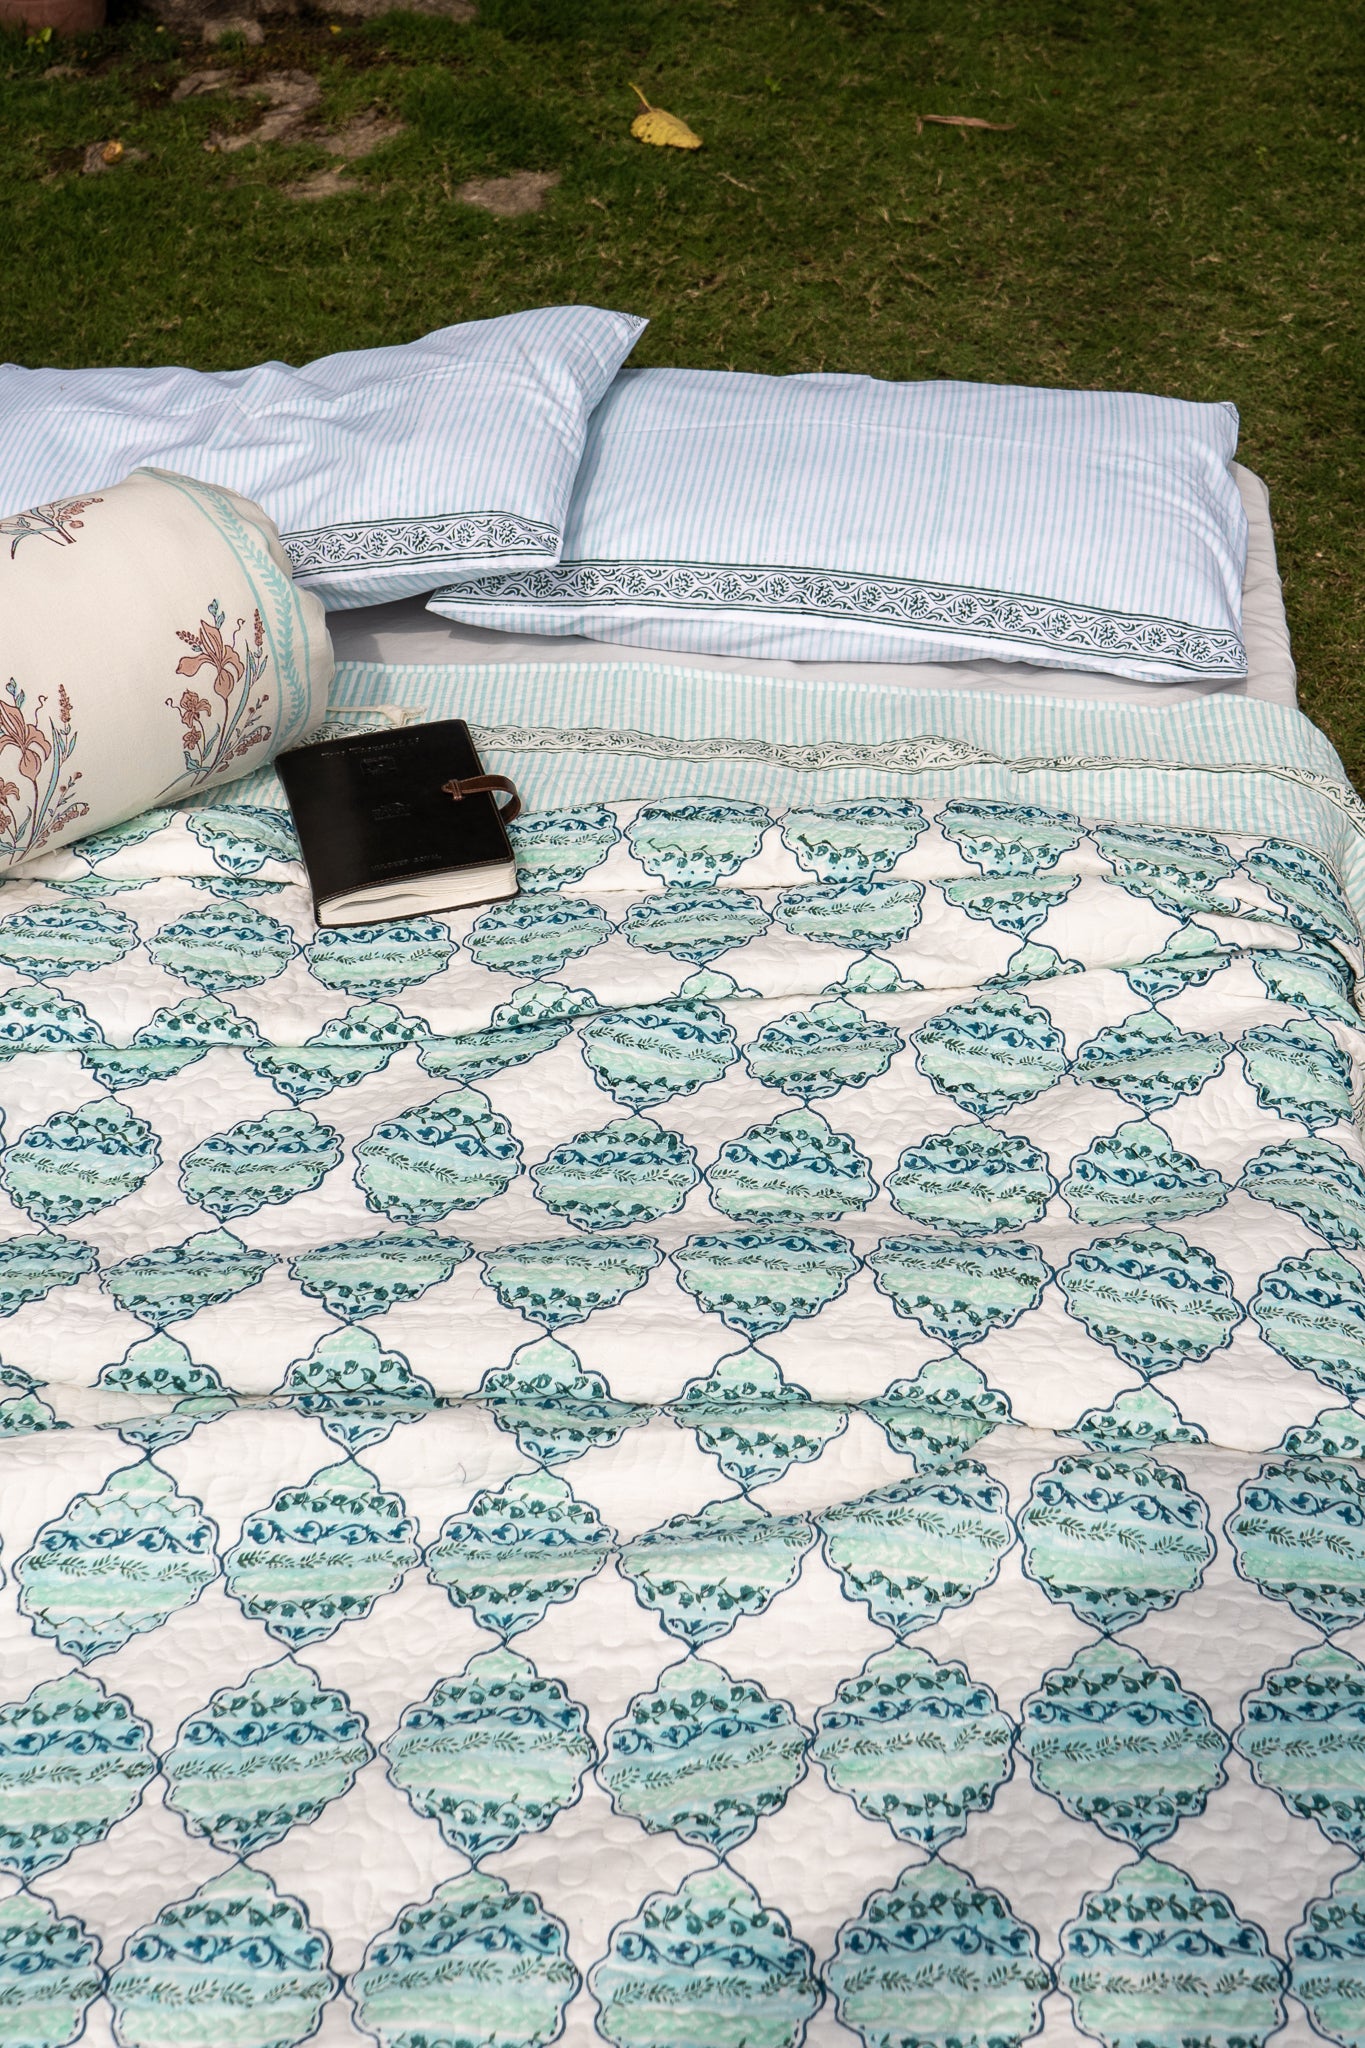 Blue and green heera jaal mulmul quilt